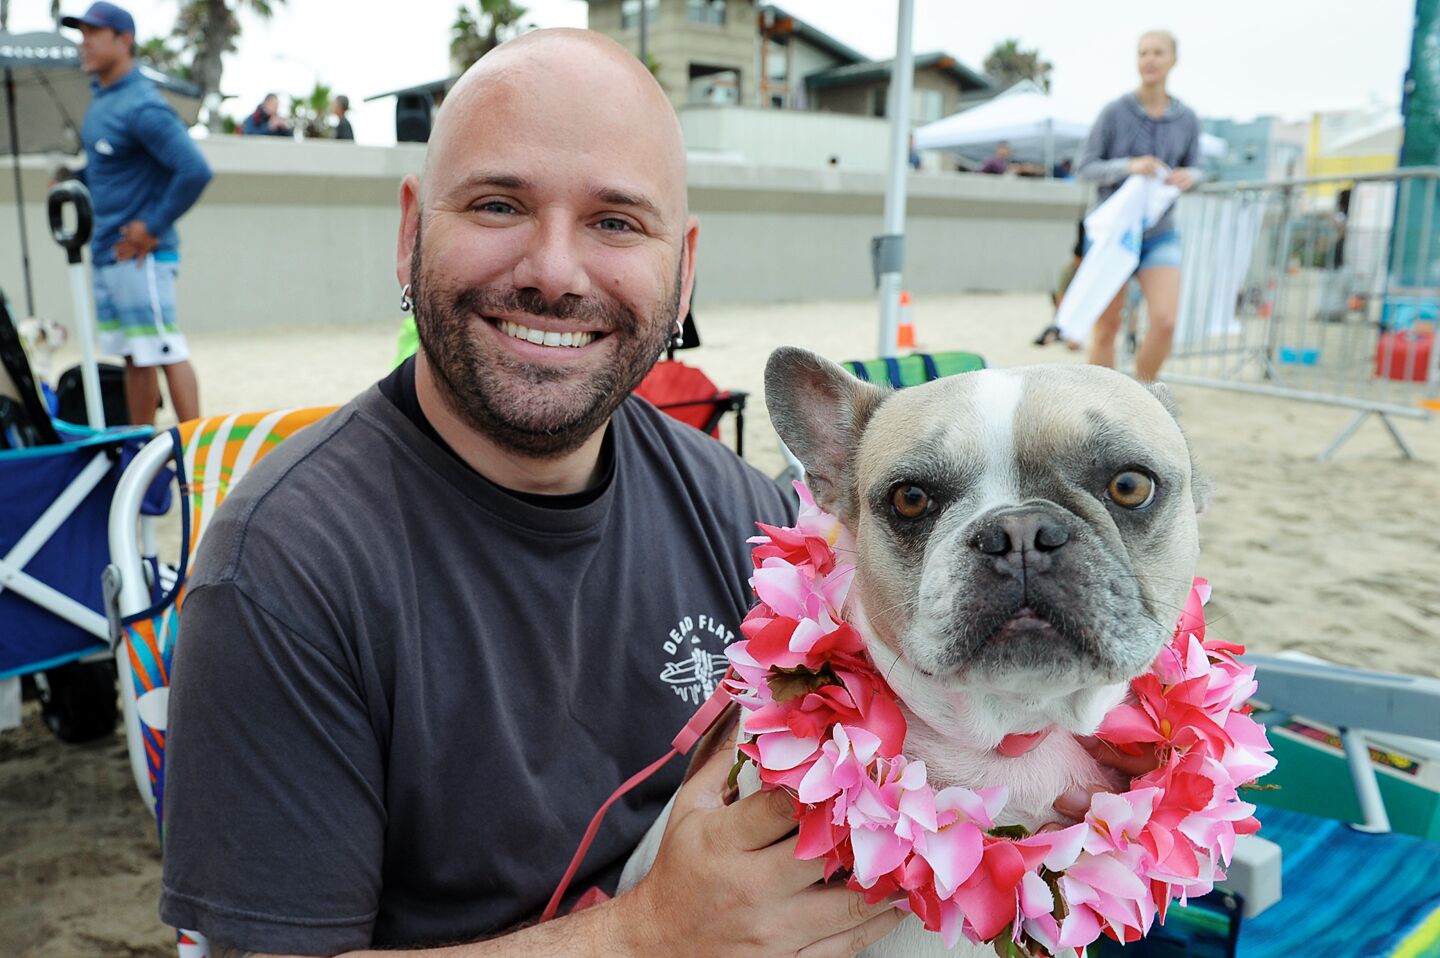 SPOTTED: 8.10.19 Imperial Beach Surf Dog Competition